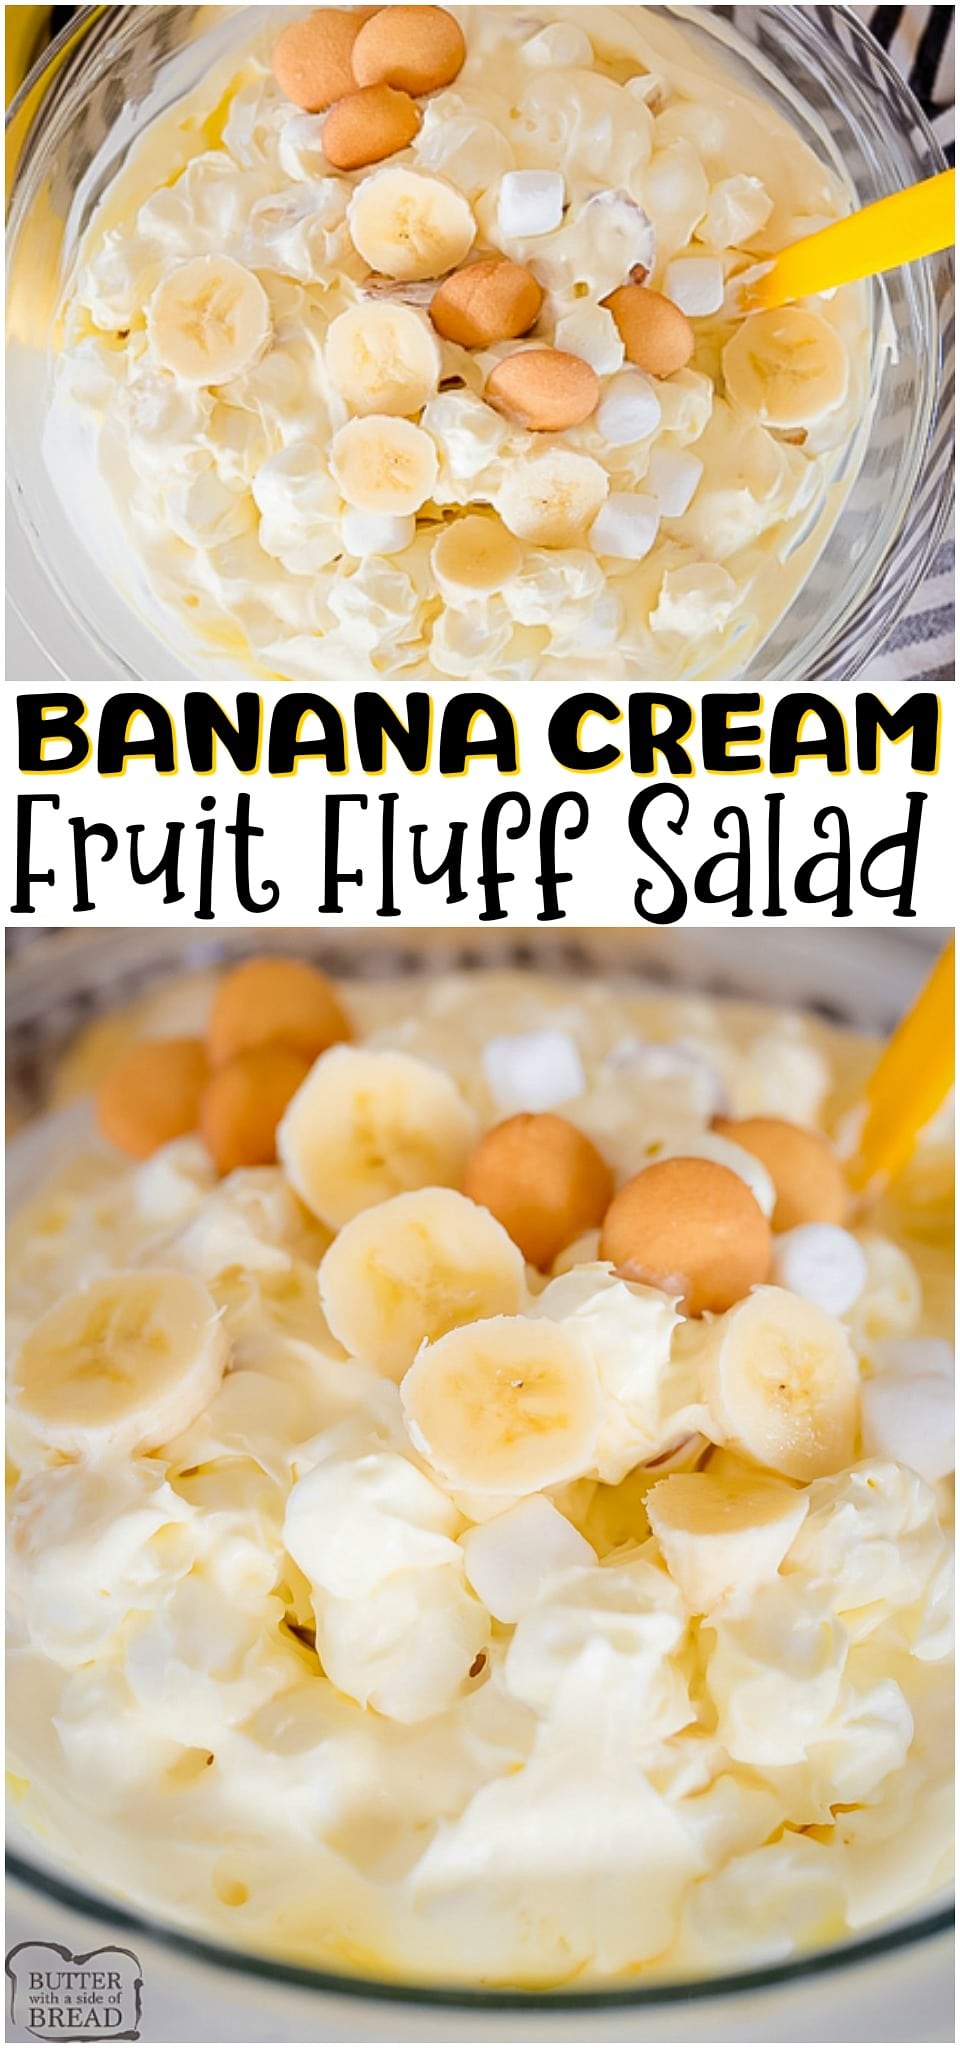 Banana Cream Fluff Salad made with bananas, yogurt, pudding mix and sweet cream. Perfect 10-minute sweet dessert salad for banana cream pie lovers! #fluffsalad #fruitsalad #banana #bananacream #dessert #bananas #recipe from BUTTER WITH A SIDE OF BREAD